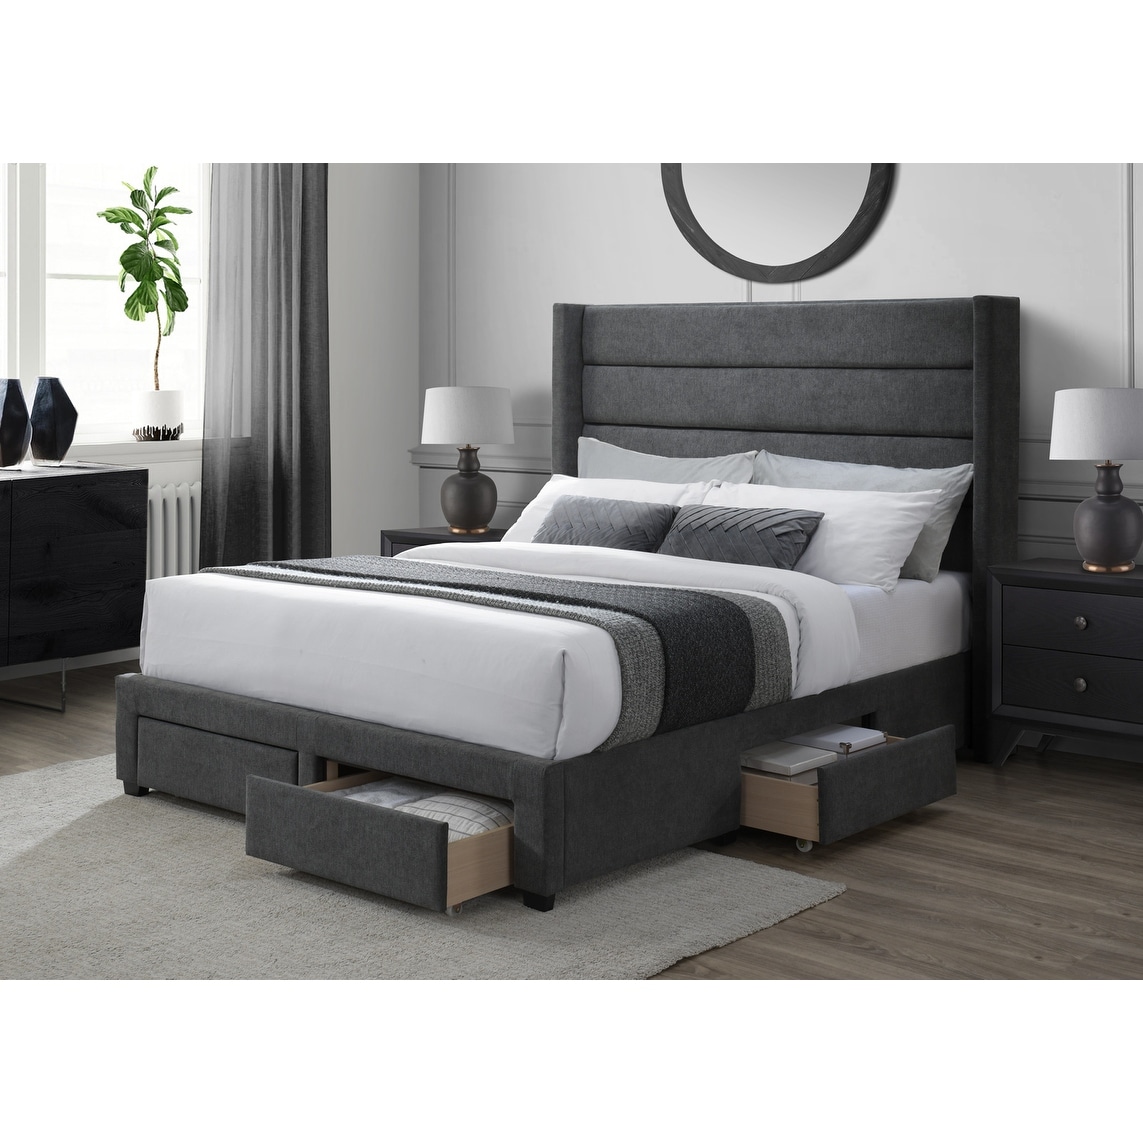 DG Casa George Charcoal Upholstered 4 Drawer Queen Storage Bed - image 1 of 3